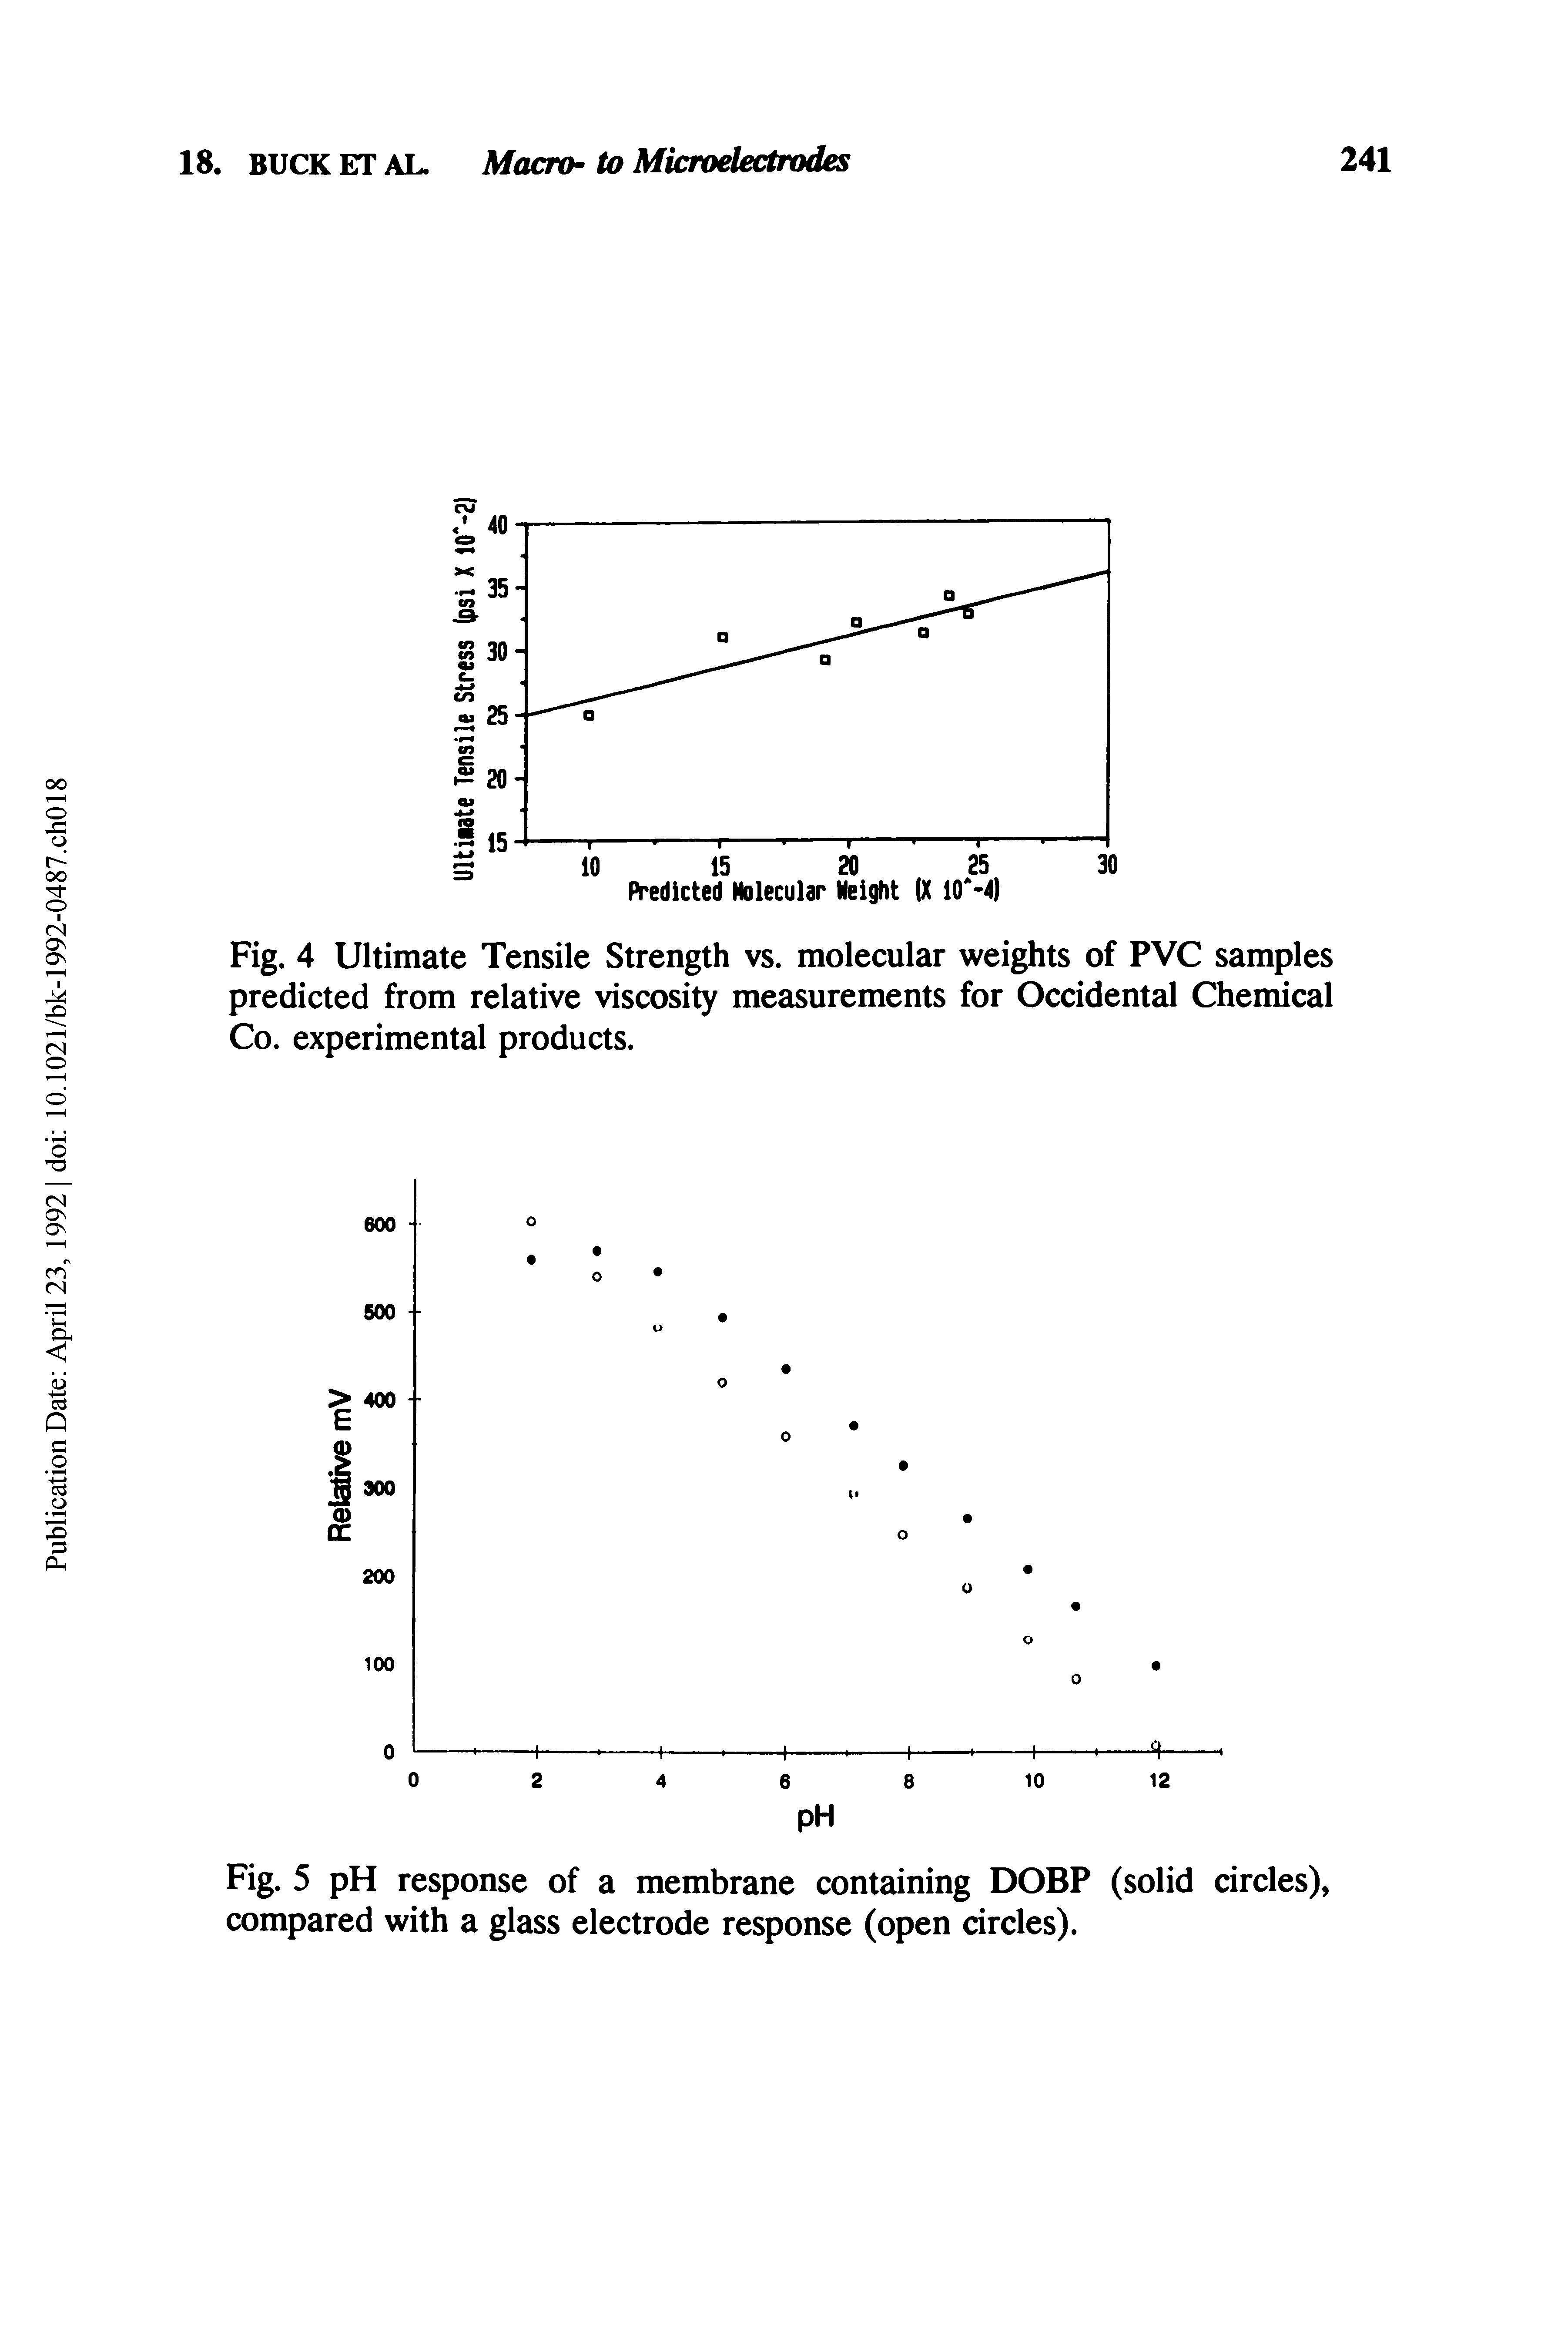 Fig. 4 Ultimate Tensile Strength vs. molecular weights of PVC samples predicted from relative viscosity measurements for Occidental Chemical Co. experimental products.